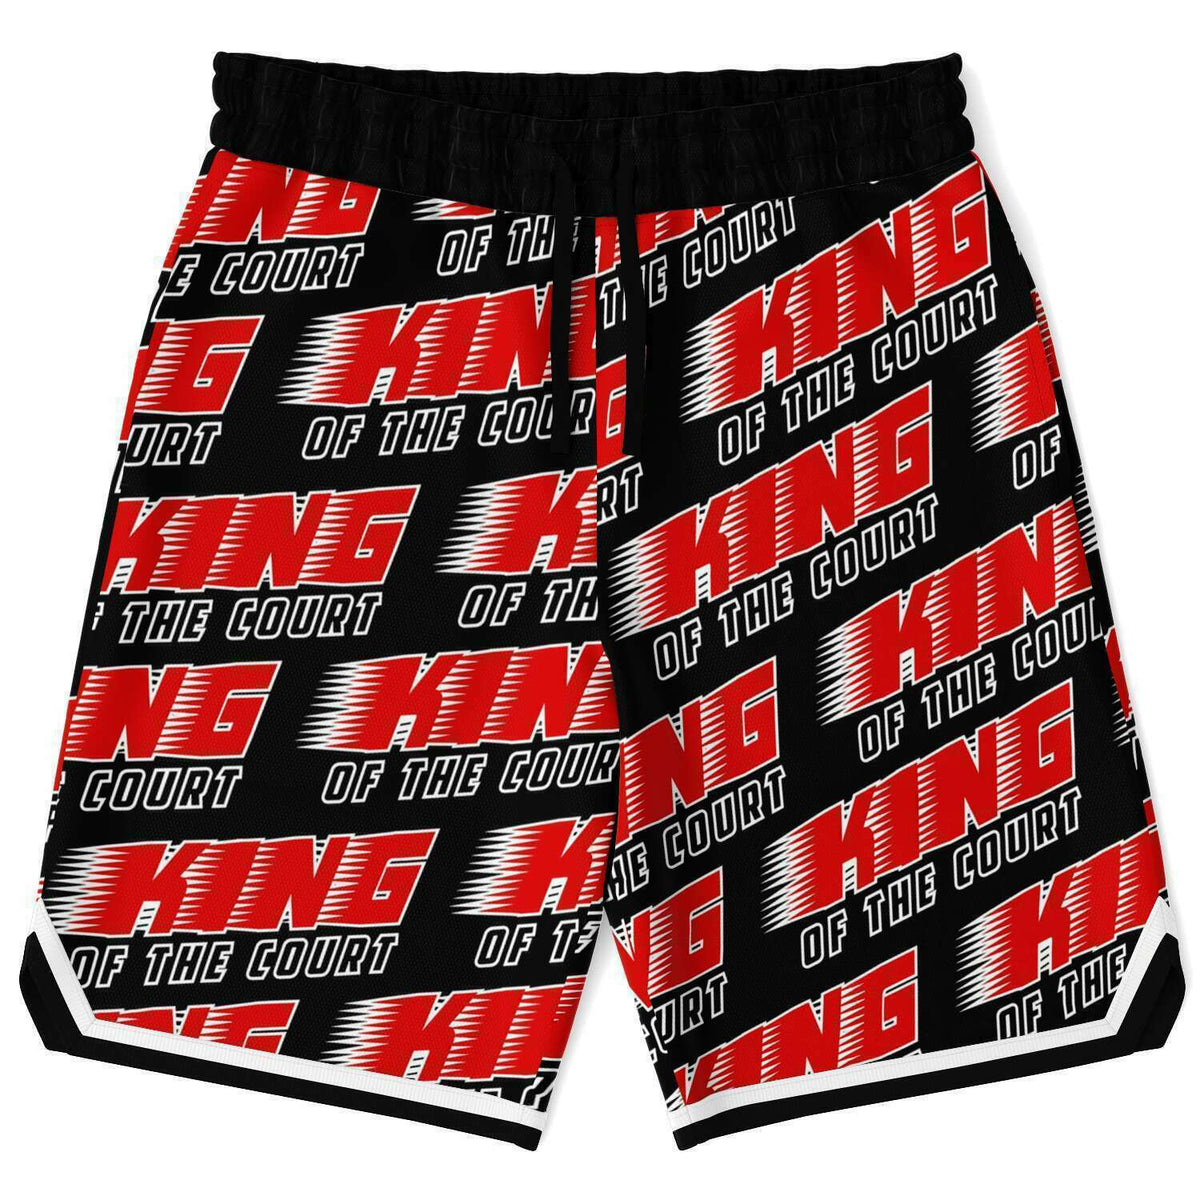 Hoop League King of the Court Game Shorts | Premium Shorts